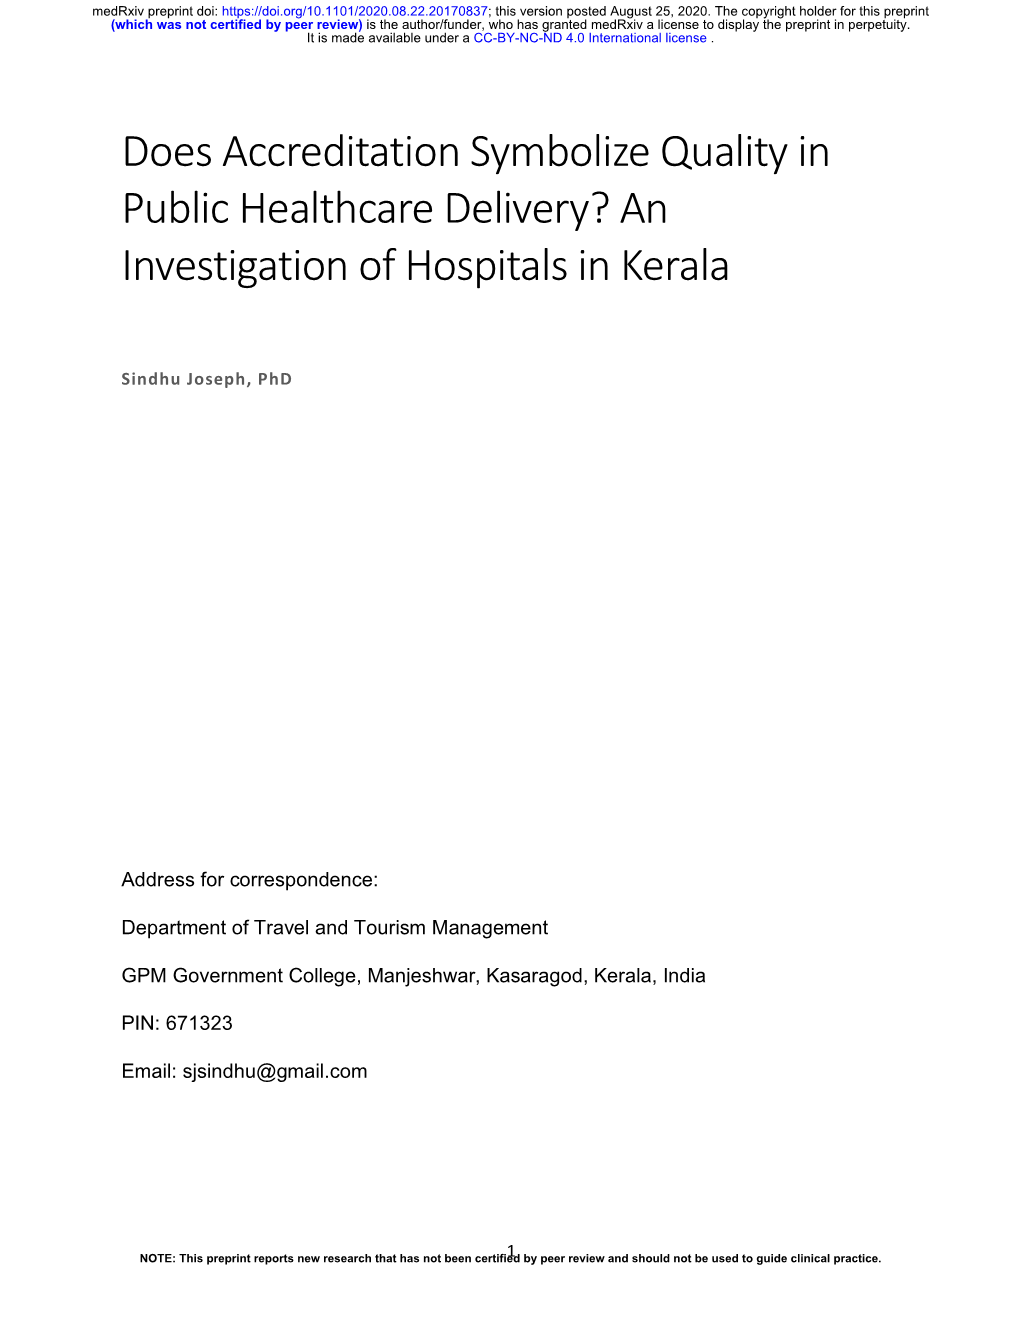 Does Accreditation Symbolize Quality in Public Healthcare Delivery? an Investigation of Hospitals in Kerala